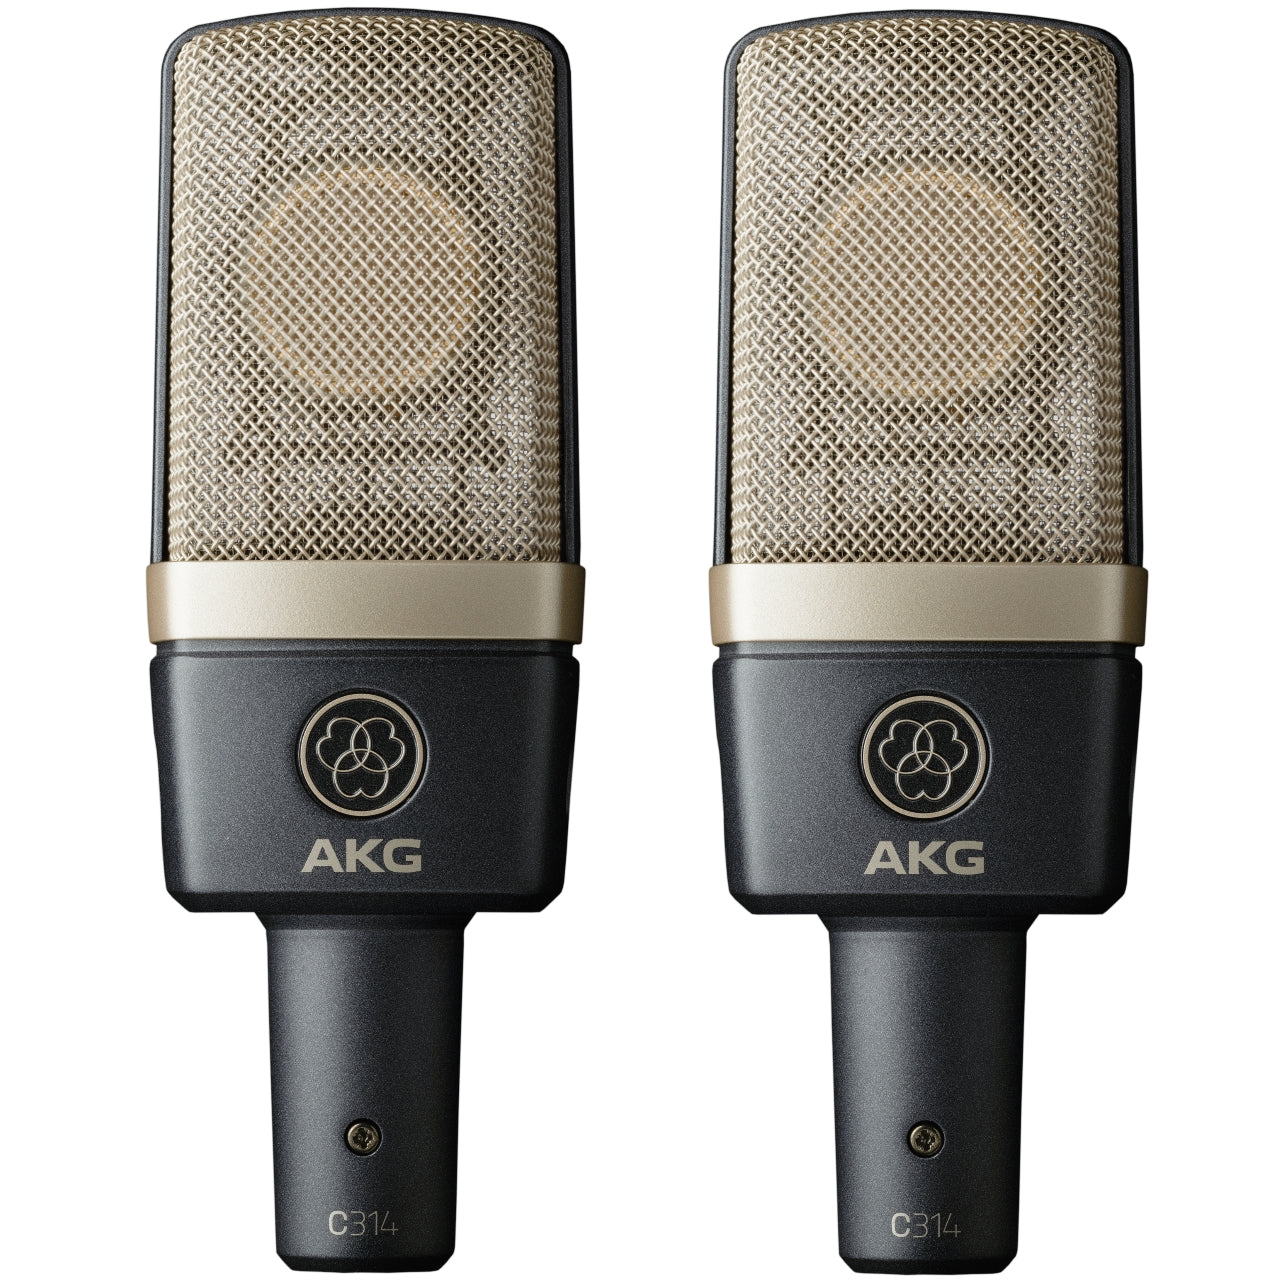 AKG C314 Microphone (Stereo Matched Pair)